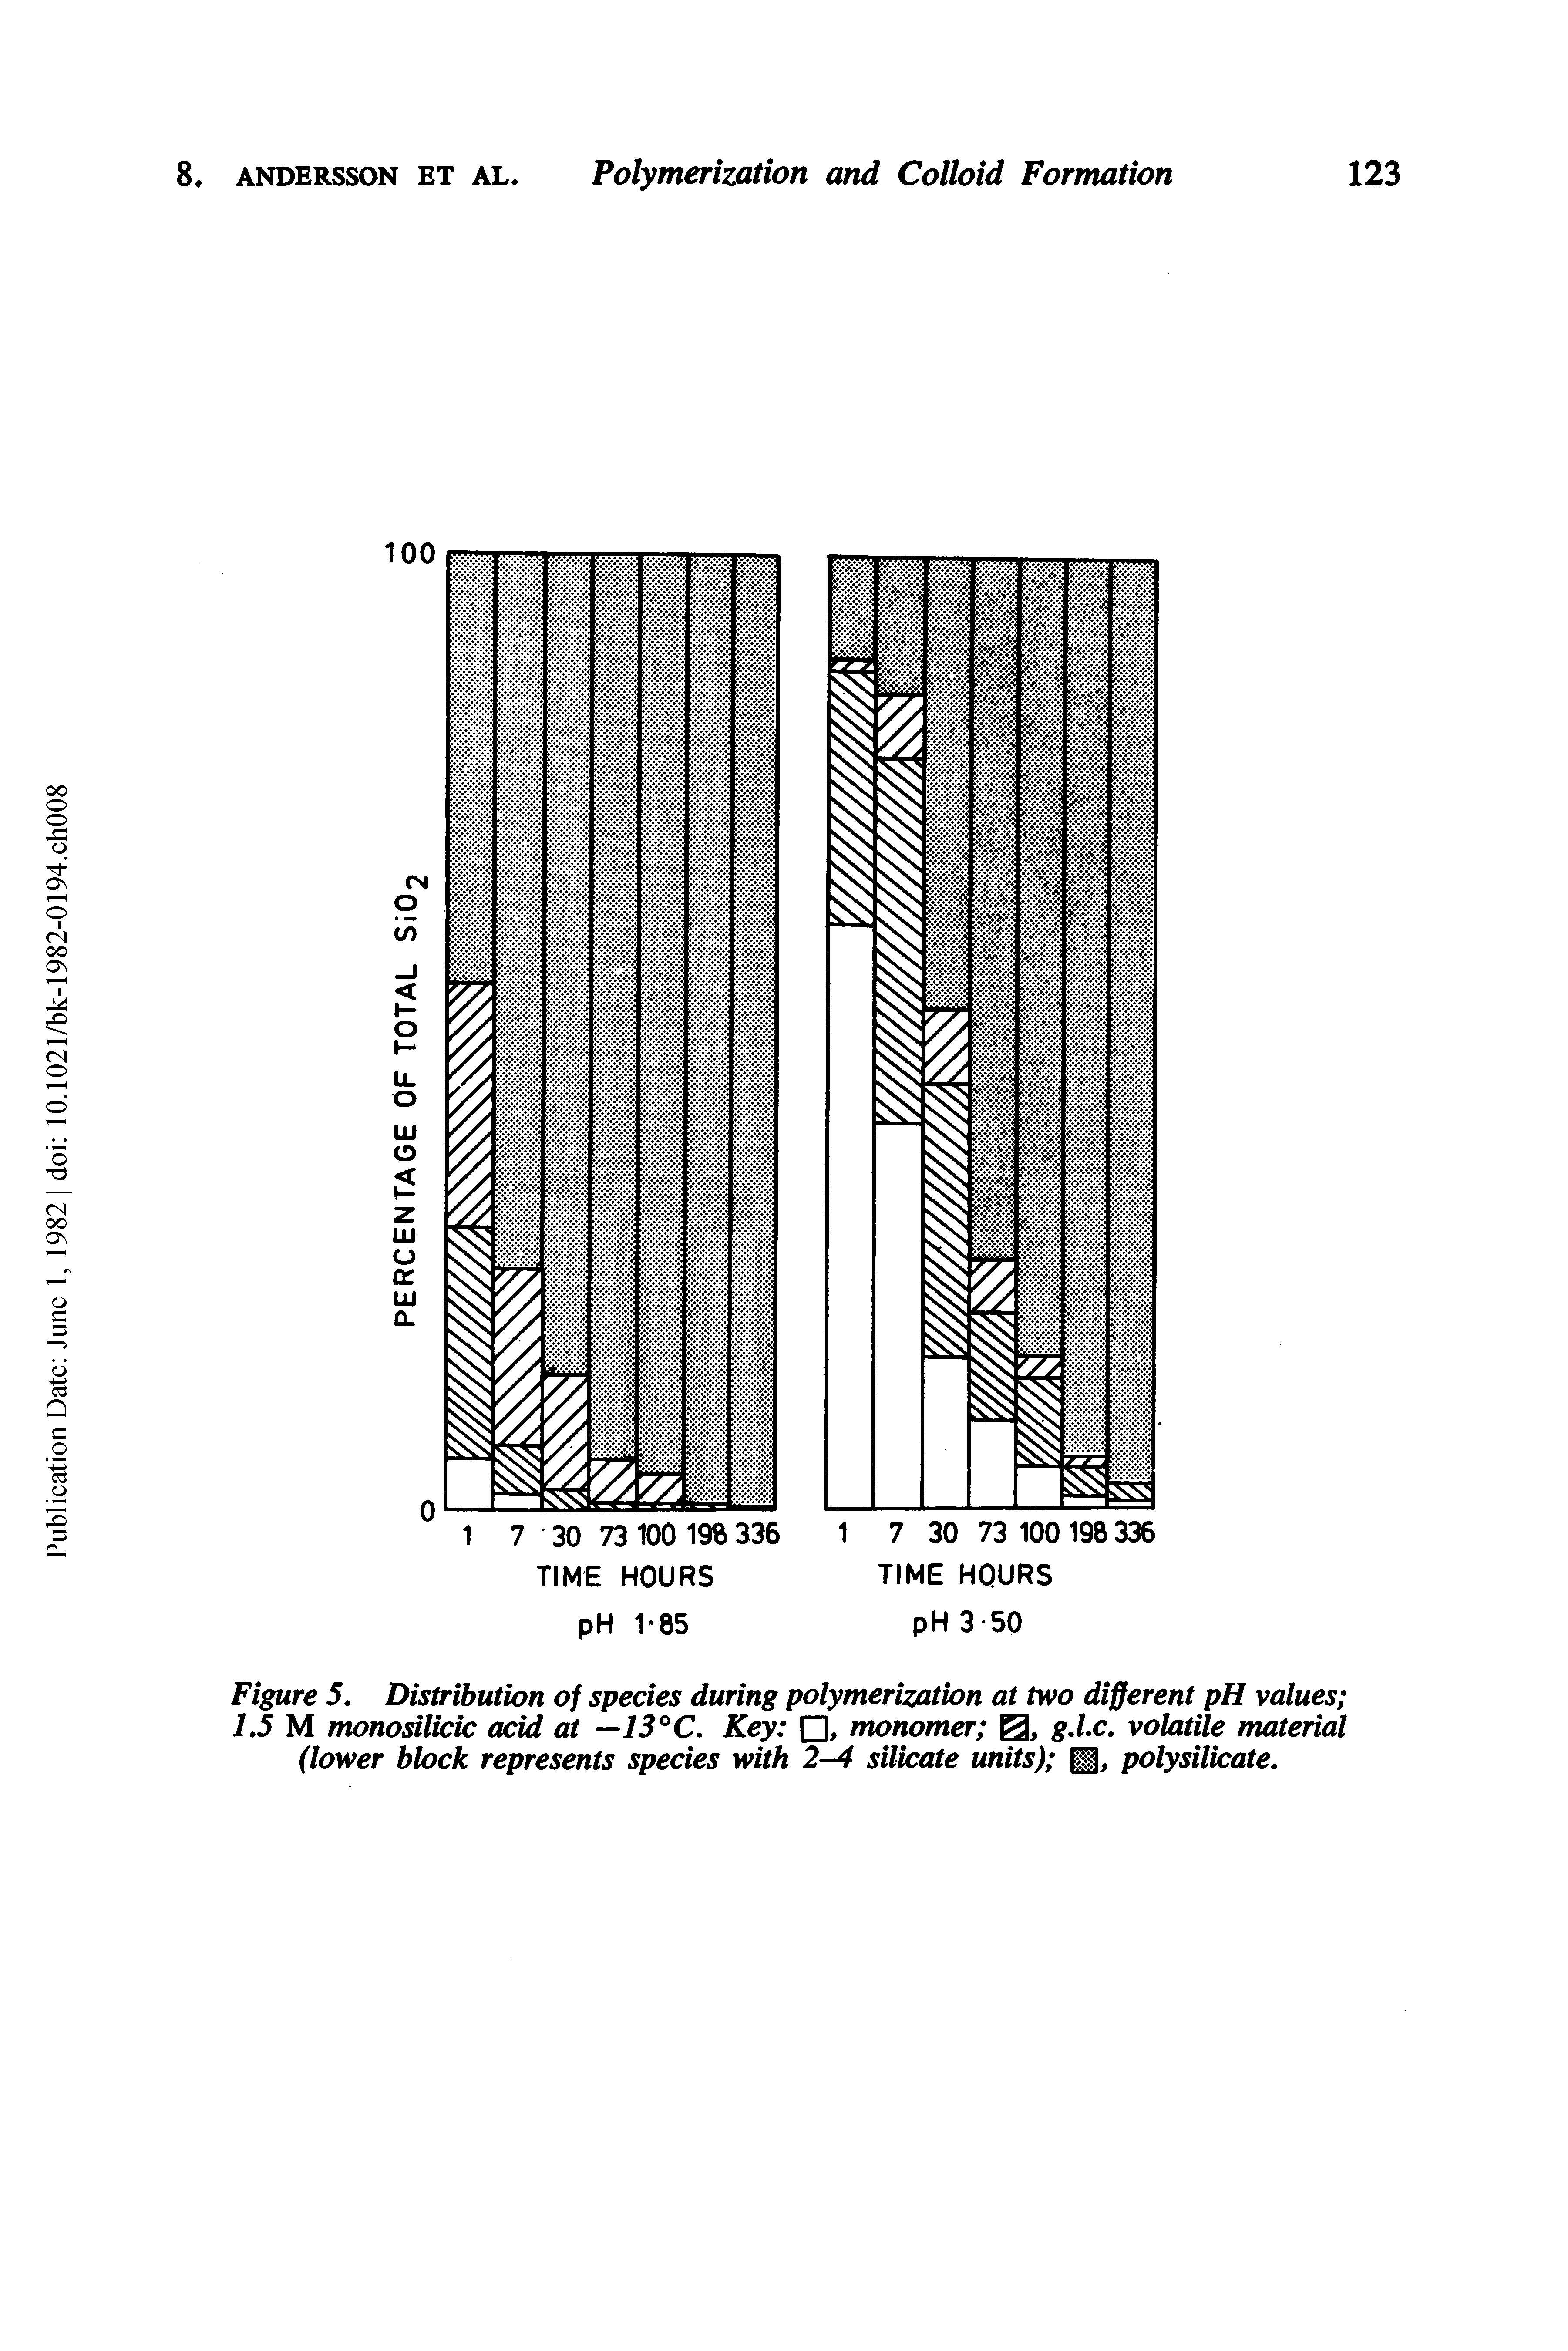 Figure 5. Distribution of species during polymerization at two different pH values L5 M monosilicic acid at —13 C. Key , monomer 0, g,lc. volatile material (lower block represents species with 2- silicate units) polysilicate.